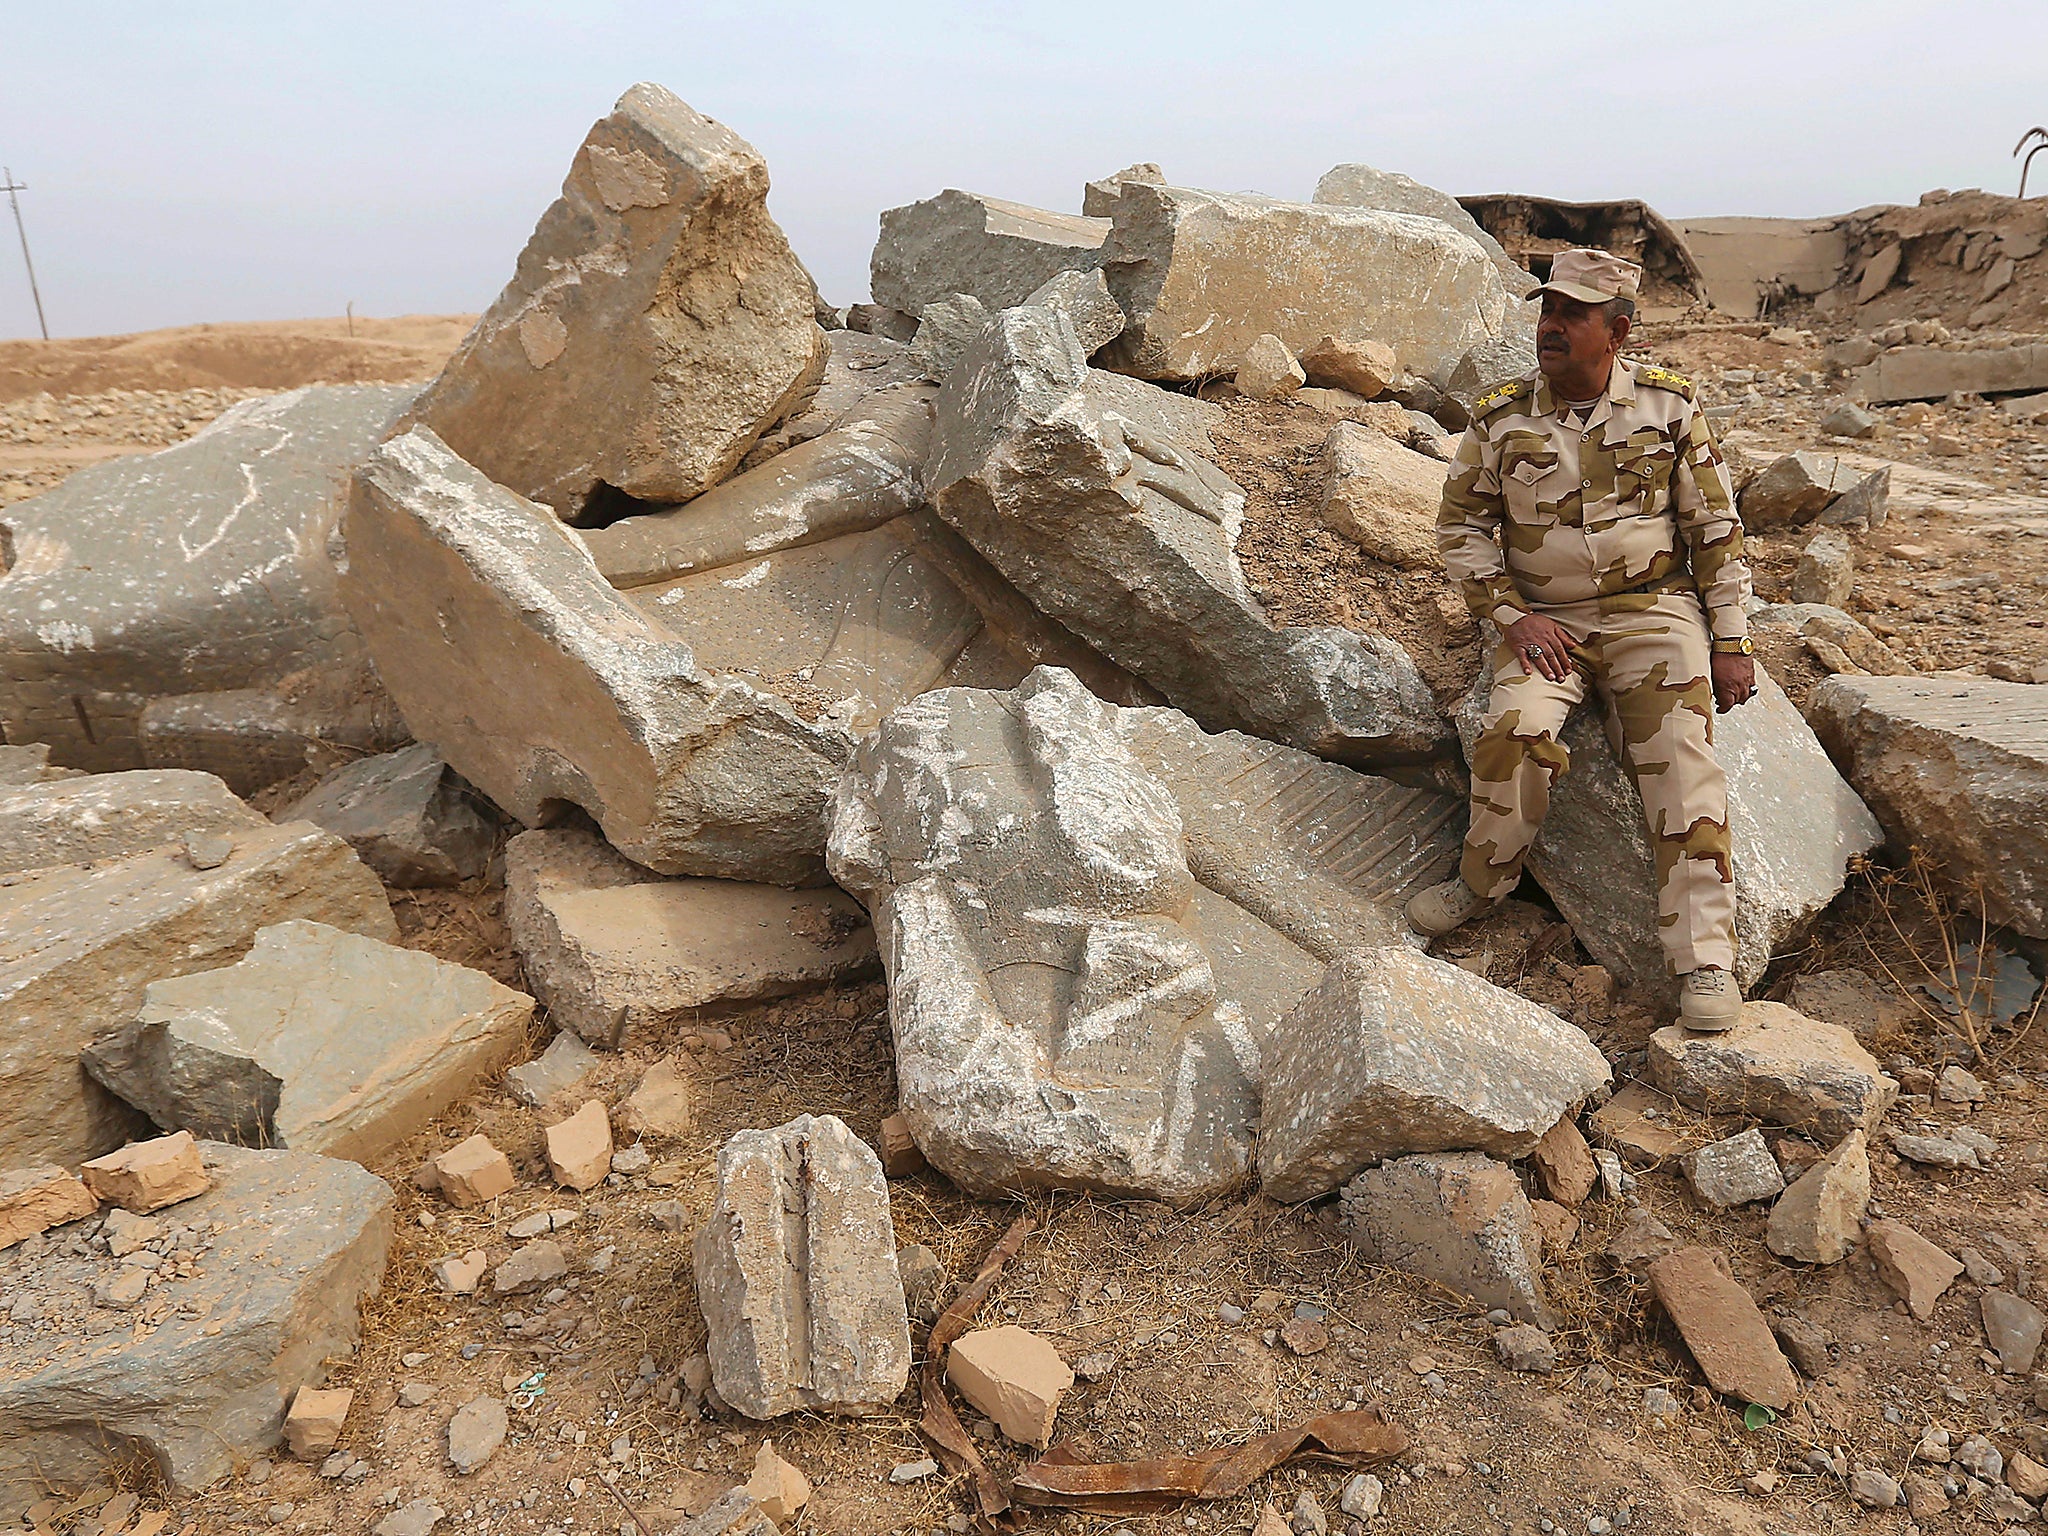 An Iraqi army officer sits on damaged carved stone slabs, which were destroyed by Islamic State militants, at the ancient site of Nimrud